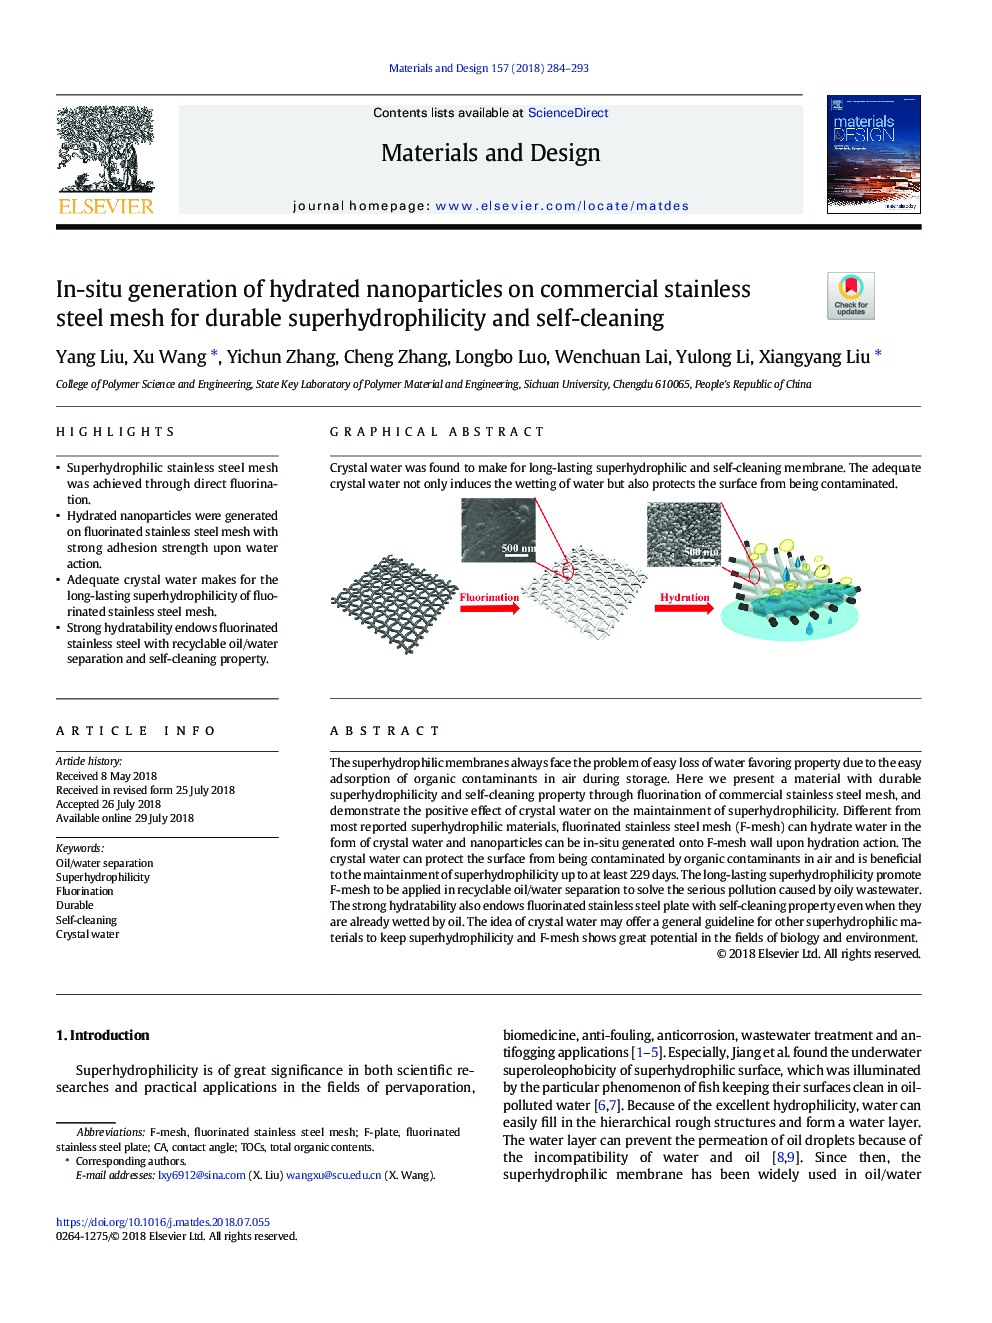 In-situ generation of hydrated nanoparticles on commercial stainless steel mesh for durable superhydrophilicity and self-cleaning